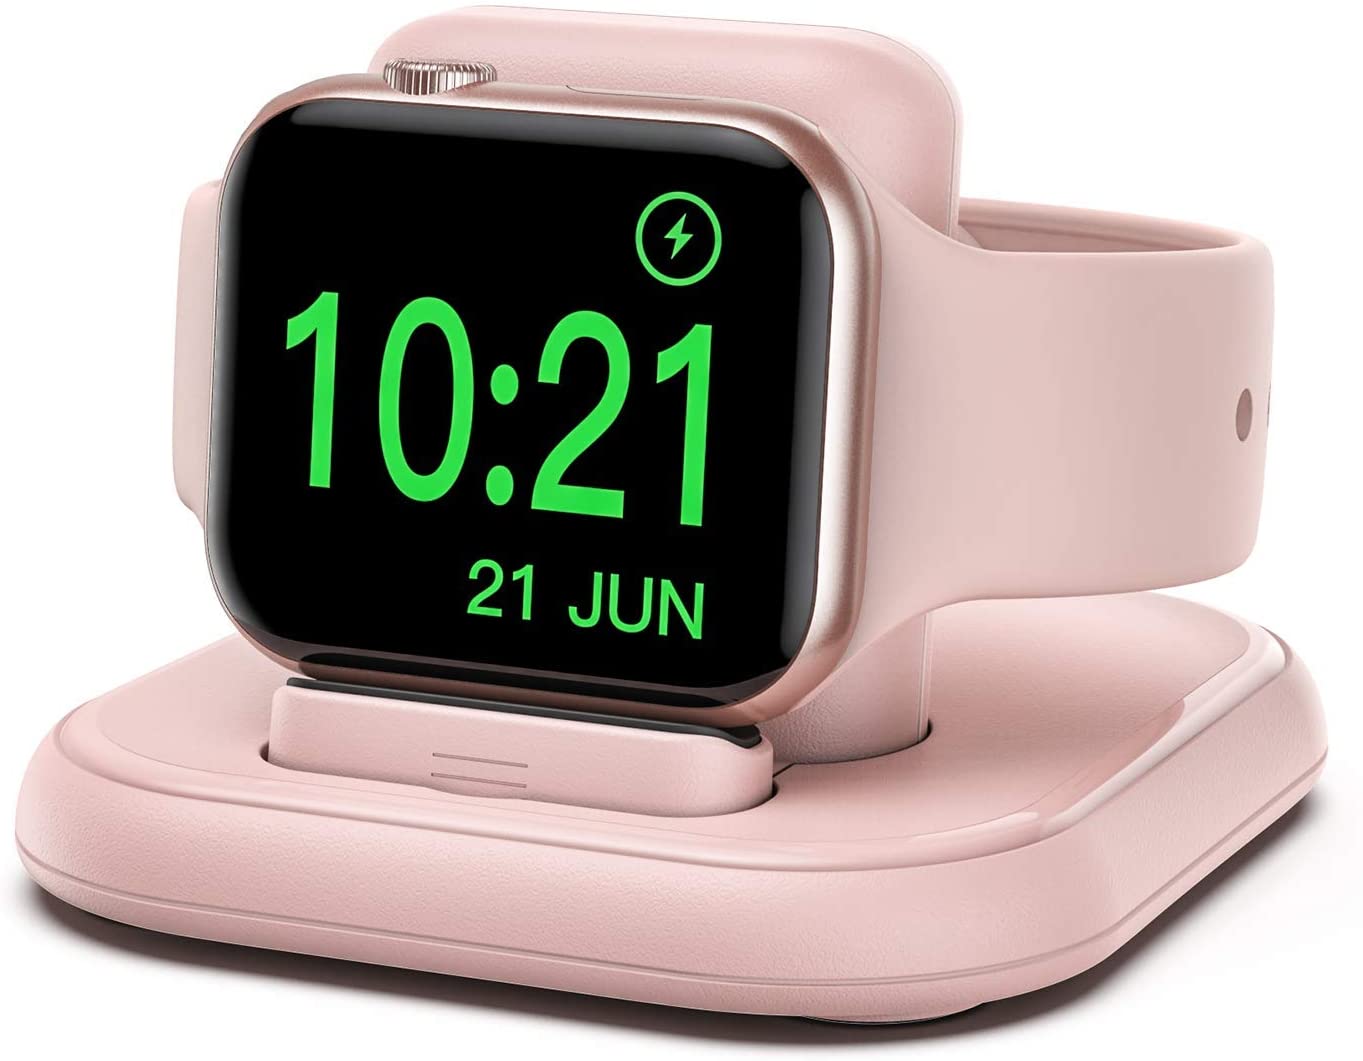 Conido Charging Stand for Apple Watch | Gadgets For Stocking Stuffers | Stocking Stuffers For Techies | Tech Stocking Stuffers | Amazon Stocking Stuffers | Stocking stuffers For Adults | stocking stuffers for men | mens stocking stuffers | Stocking stuffers for her | Stocking stuffers for guys | Cheap stocking stuffers | Best stocking stuffers | Stocking stuffers for wife | stocking stuffer gifts | Best stocking stuffers